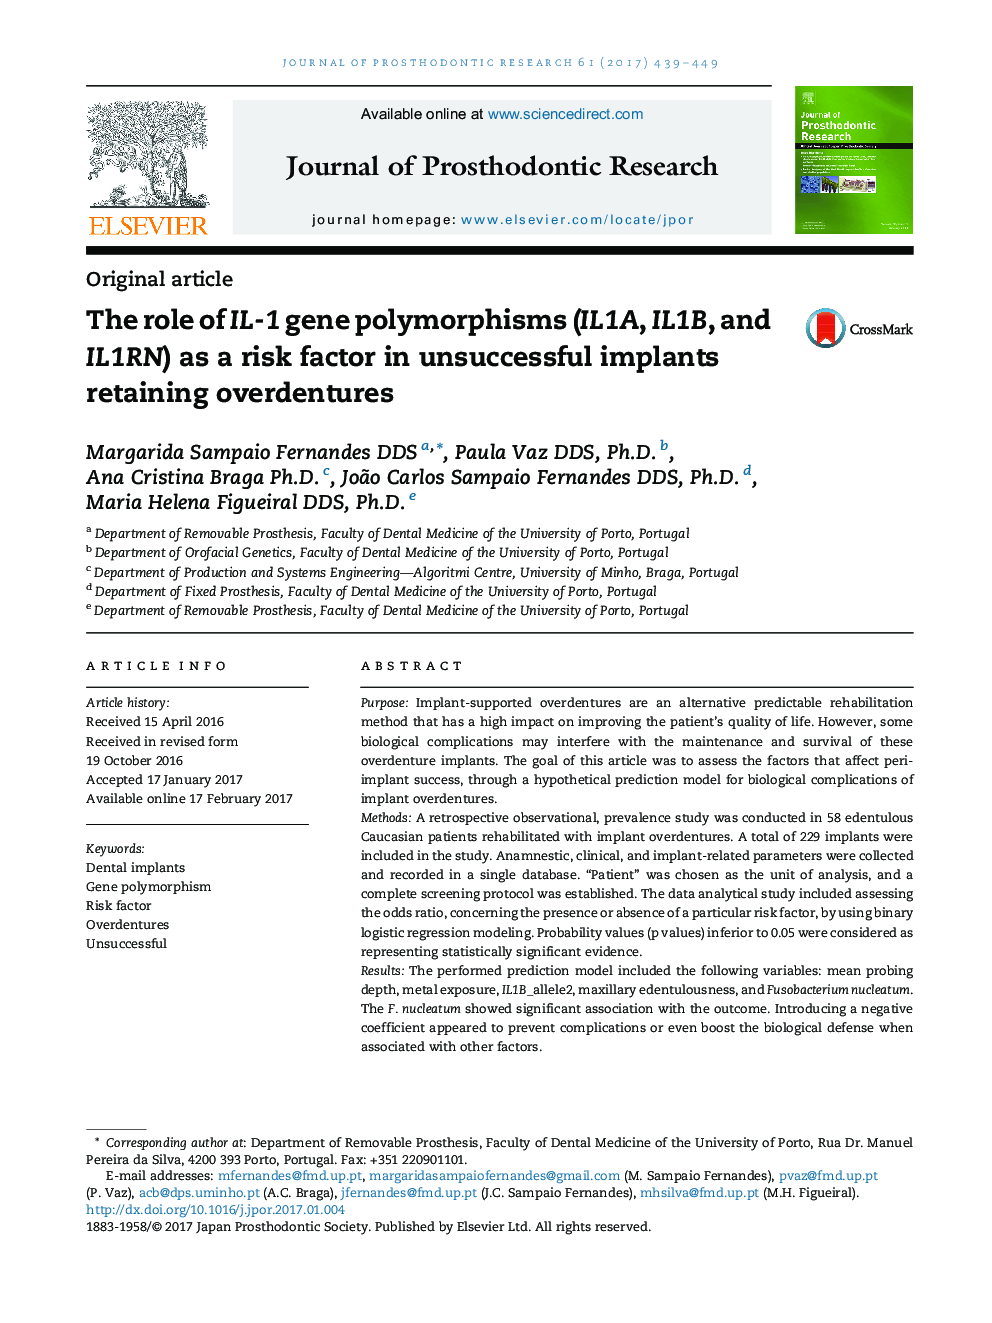 The role of IL-1 gene polymorphisms (IL1A, IL1B, and IL1RN) as a risk factor in unsuccessful implants retaining overdentures